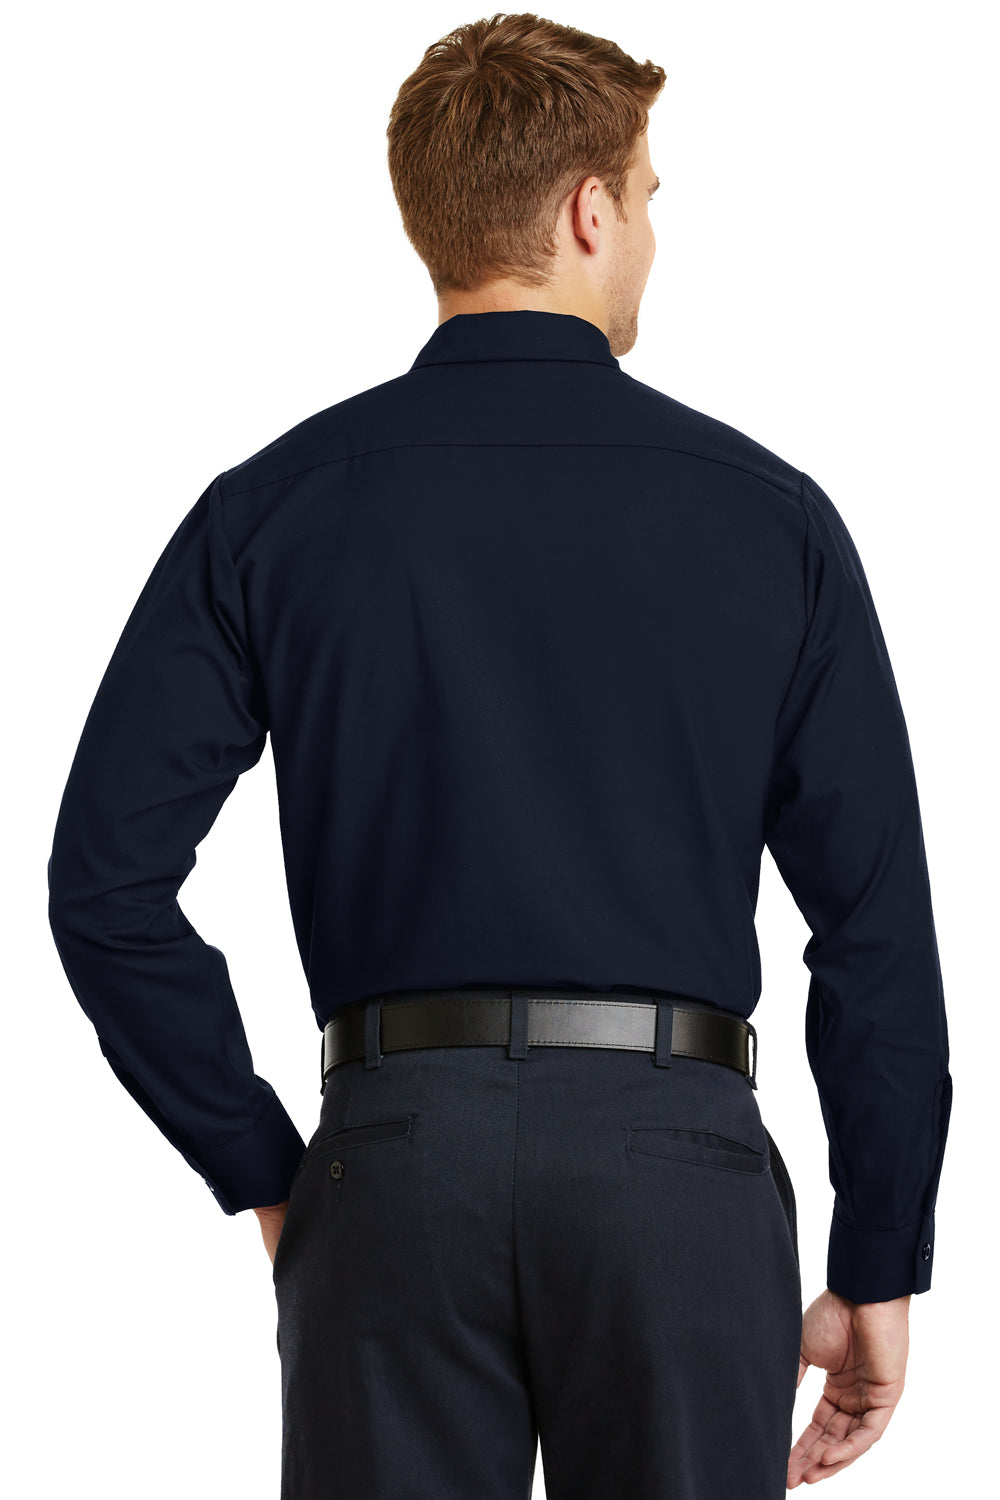 Red Kap SP14 Mens Industrial Moisture Wicking Long Sleeve Button Down Shirt w/ Double Pockets Navy Blue Back